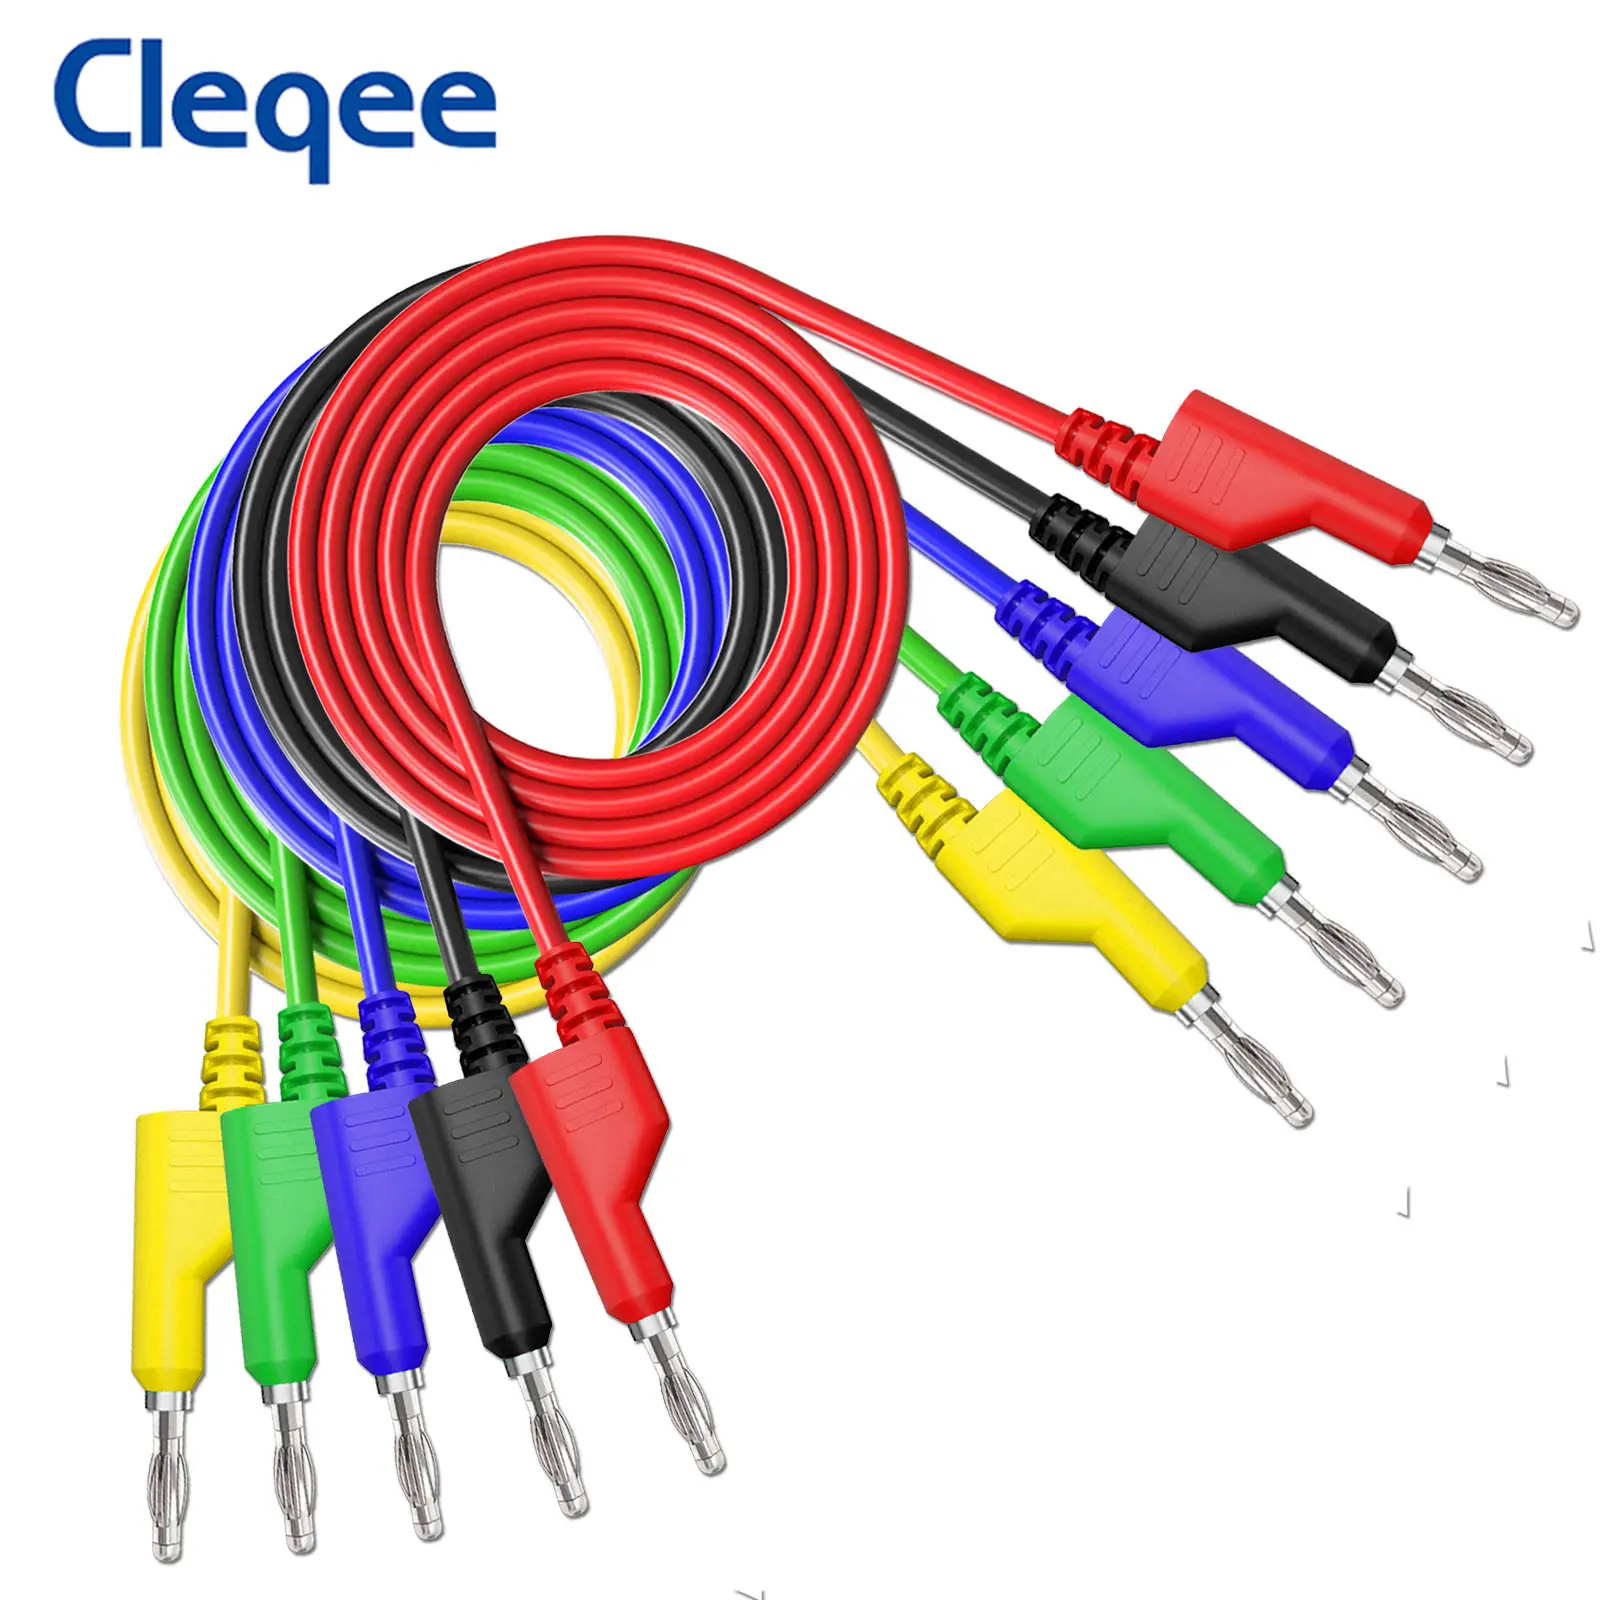 Cleqee P1036 1M 5 Colors Dual 4mm Stackable Banana Plug Multimeter Test lead for Multimeter 1000V 15A